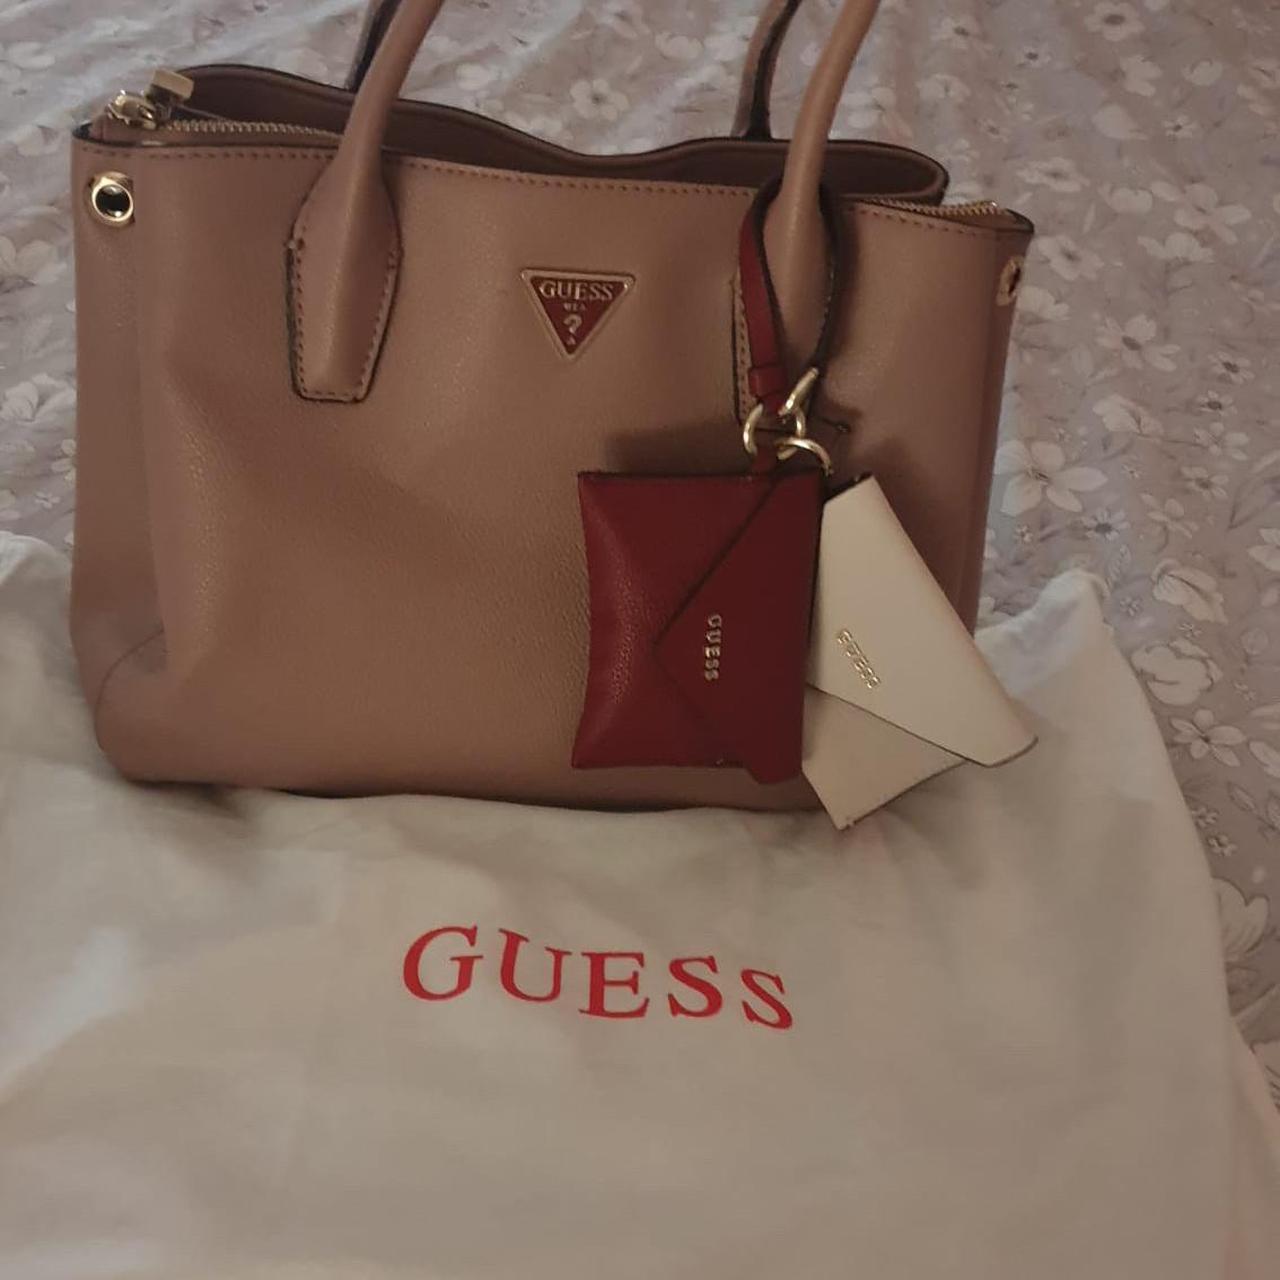 Gorgeous blush pink Guess handbag, comes with dust... - Depop